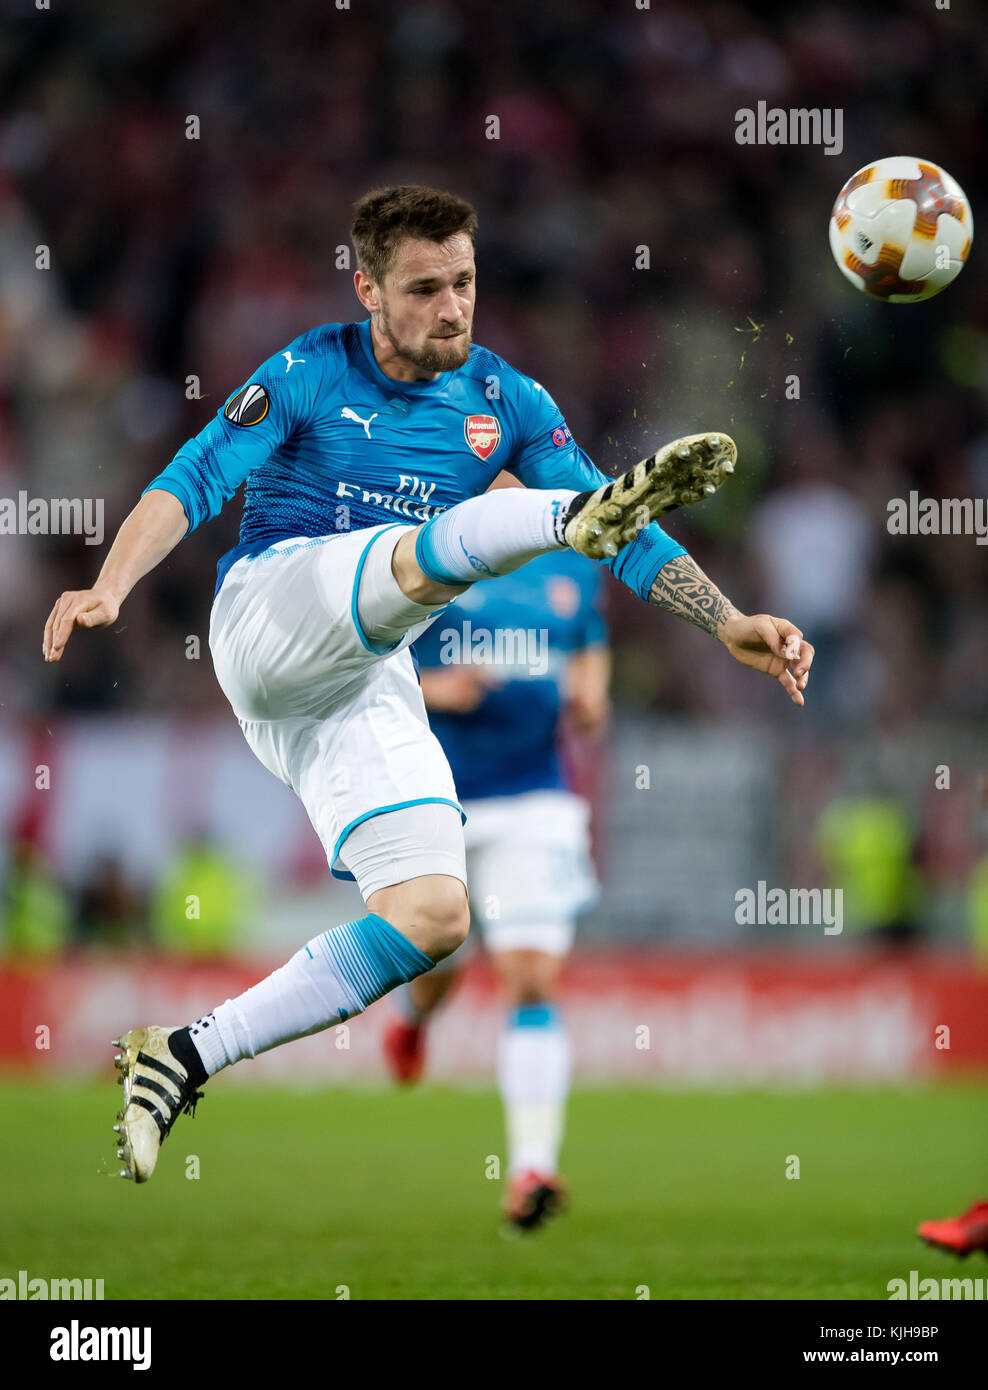 Cologne, Germany. 23rd Nov, 2017. Arsenal's Mathieu Debuchy in action during the UEFA Europa League soccer match between 1. FC Cologne and FC Arsenal London at the Rheinenergiestadion in Cologne, Germany, 23 November 2017. - NO WIRE SERVICE - Credit: Thomas Eisenhuth/dpa-Zentralbild/ZB/dpa/Alamy Live News Stock Photo